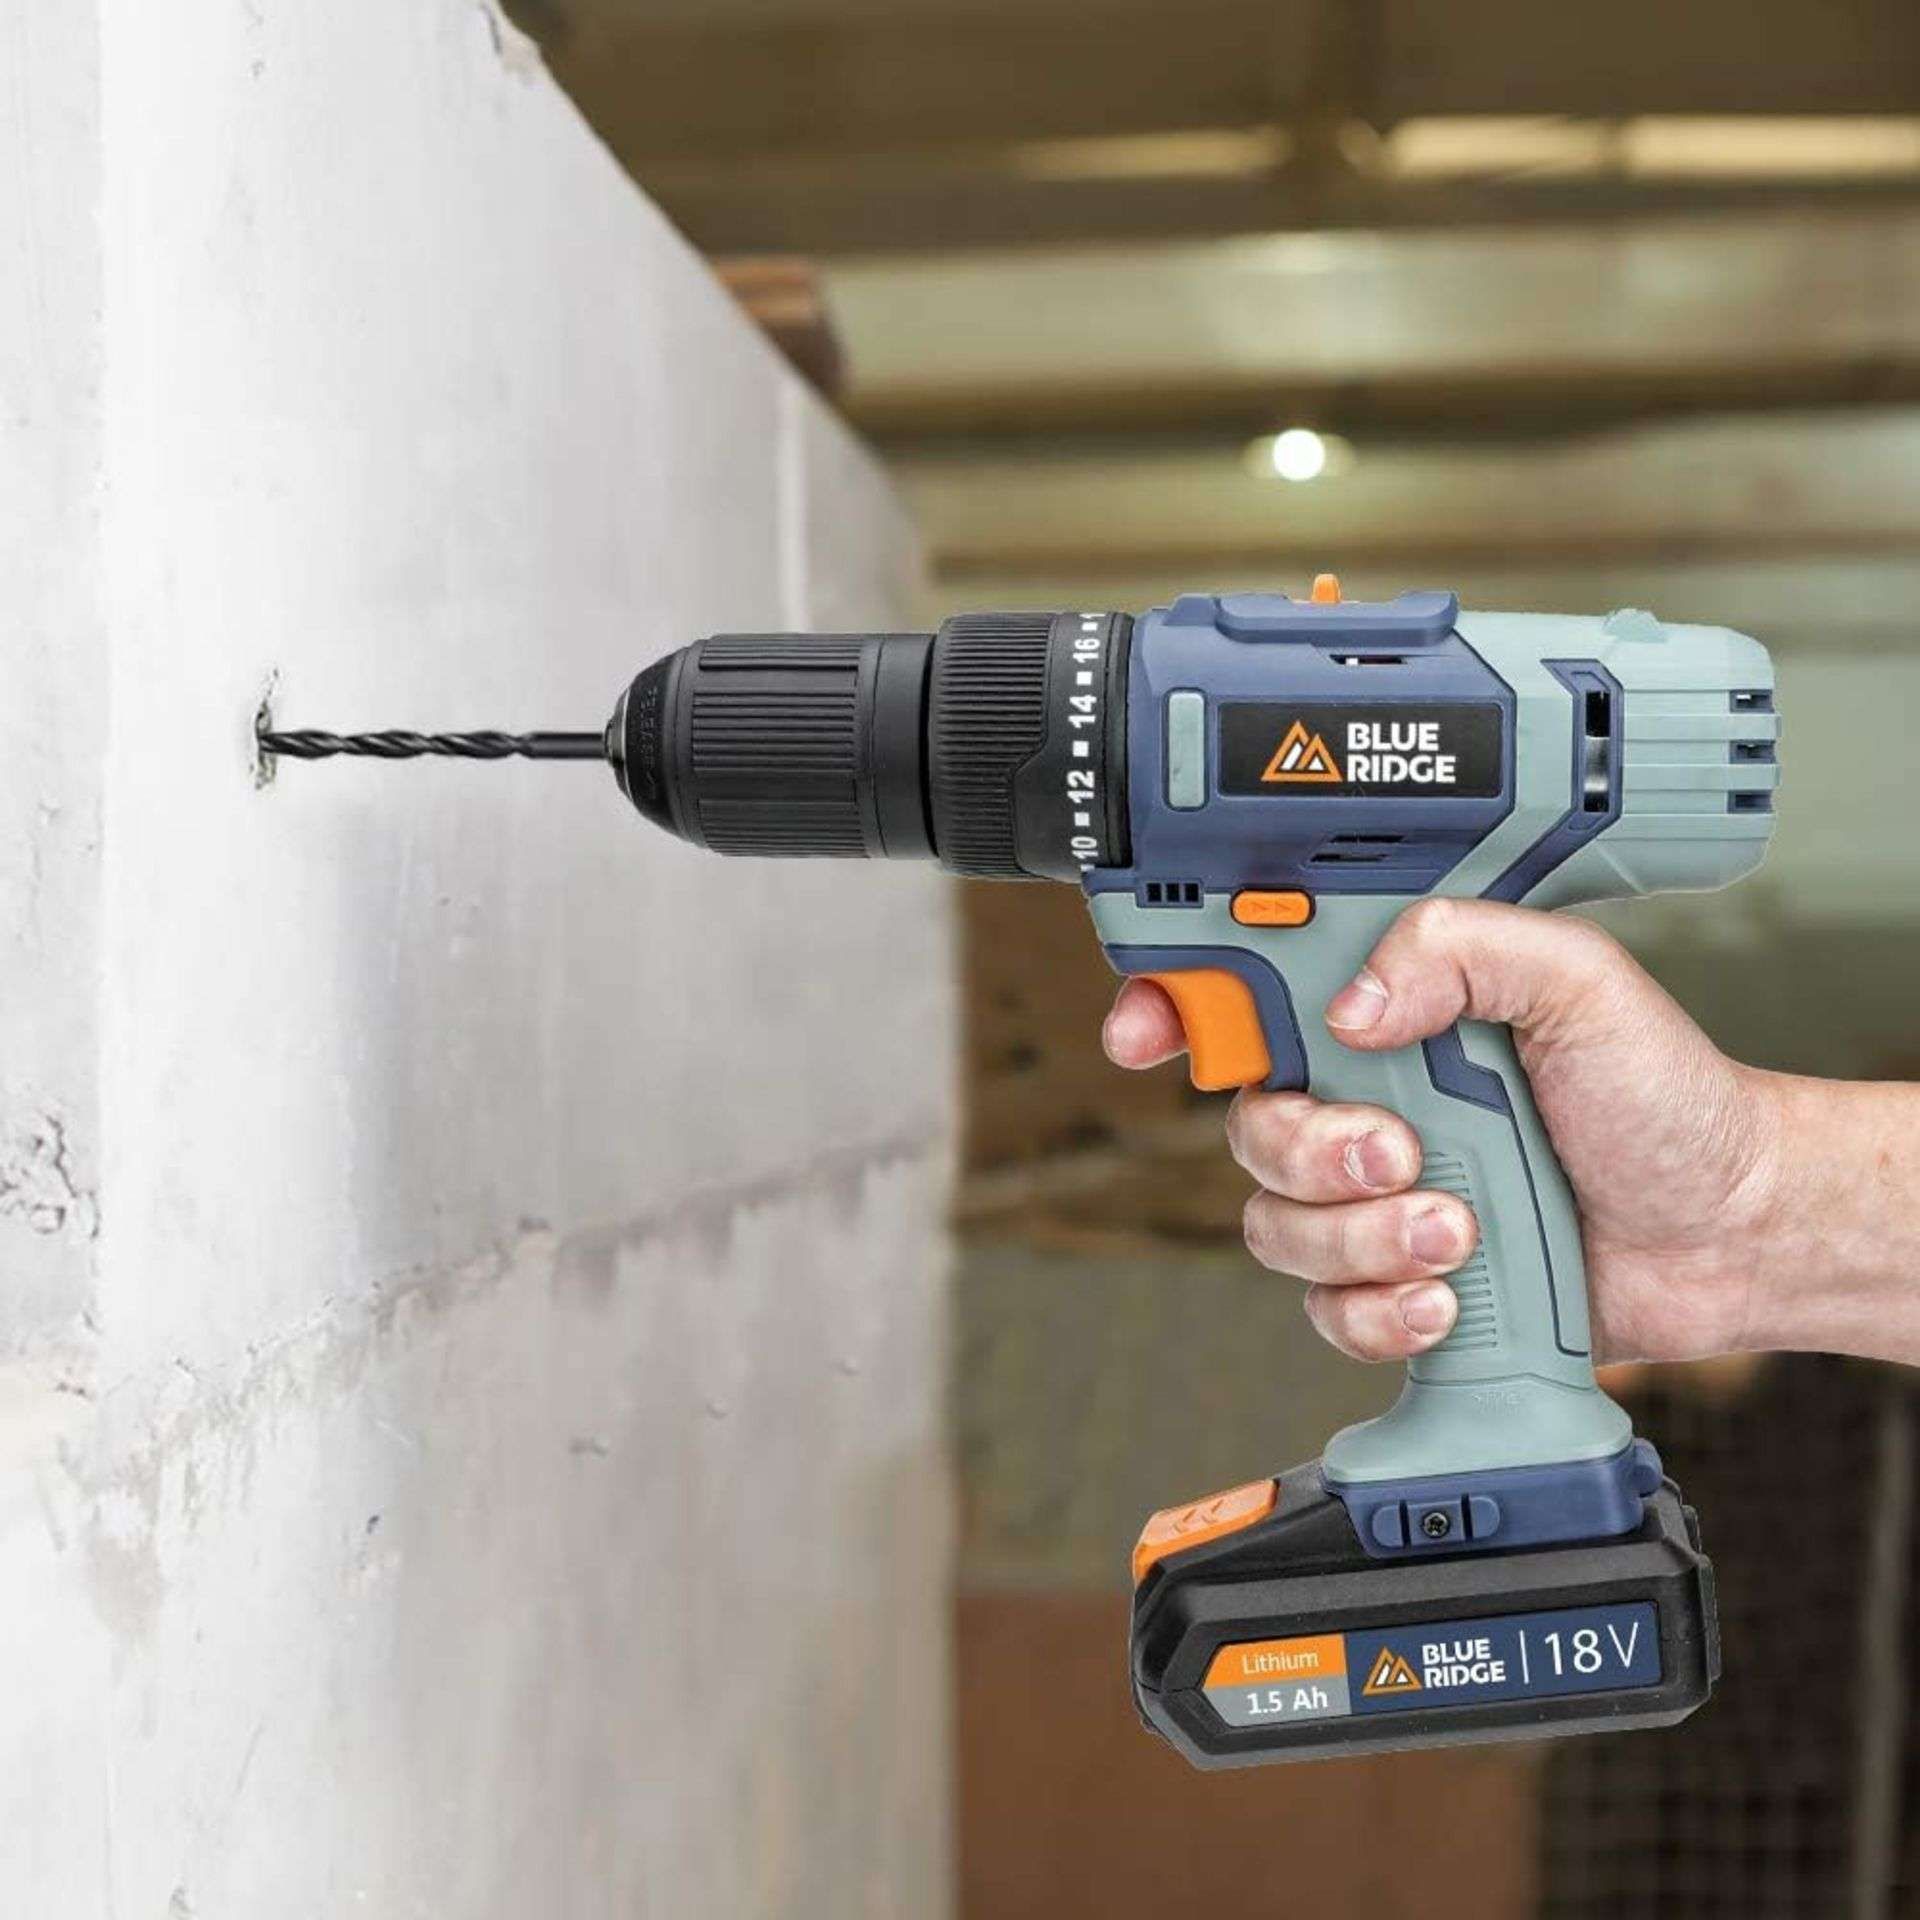 NEW & BOXED BLUE RIDGE 18V Cordless Hammer Drill with 2 x 1.5 Ah Li-ion Batteries & 43 Piece - Image 4 of 4